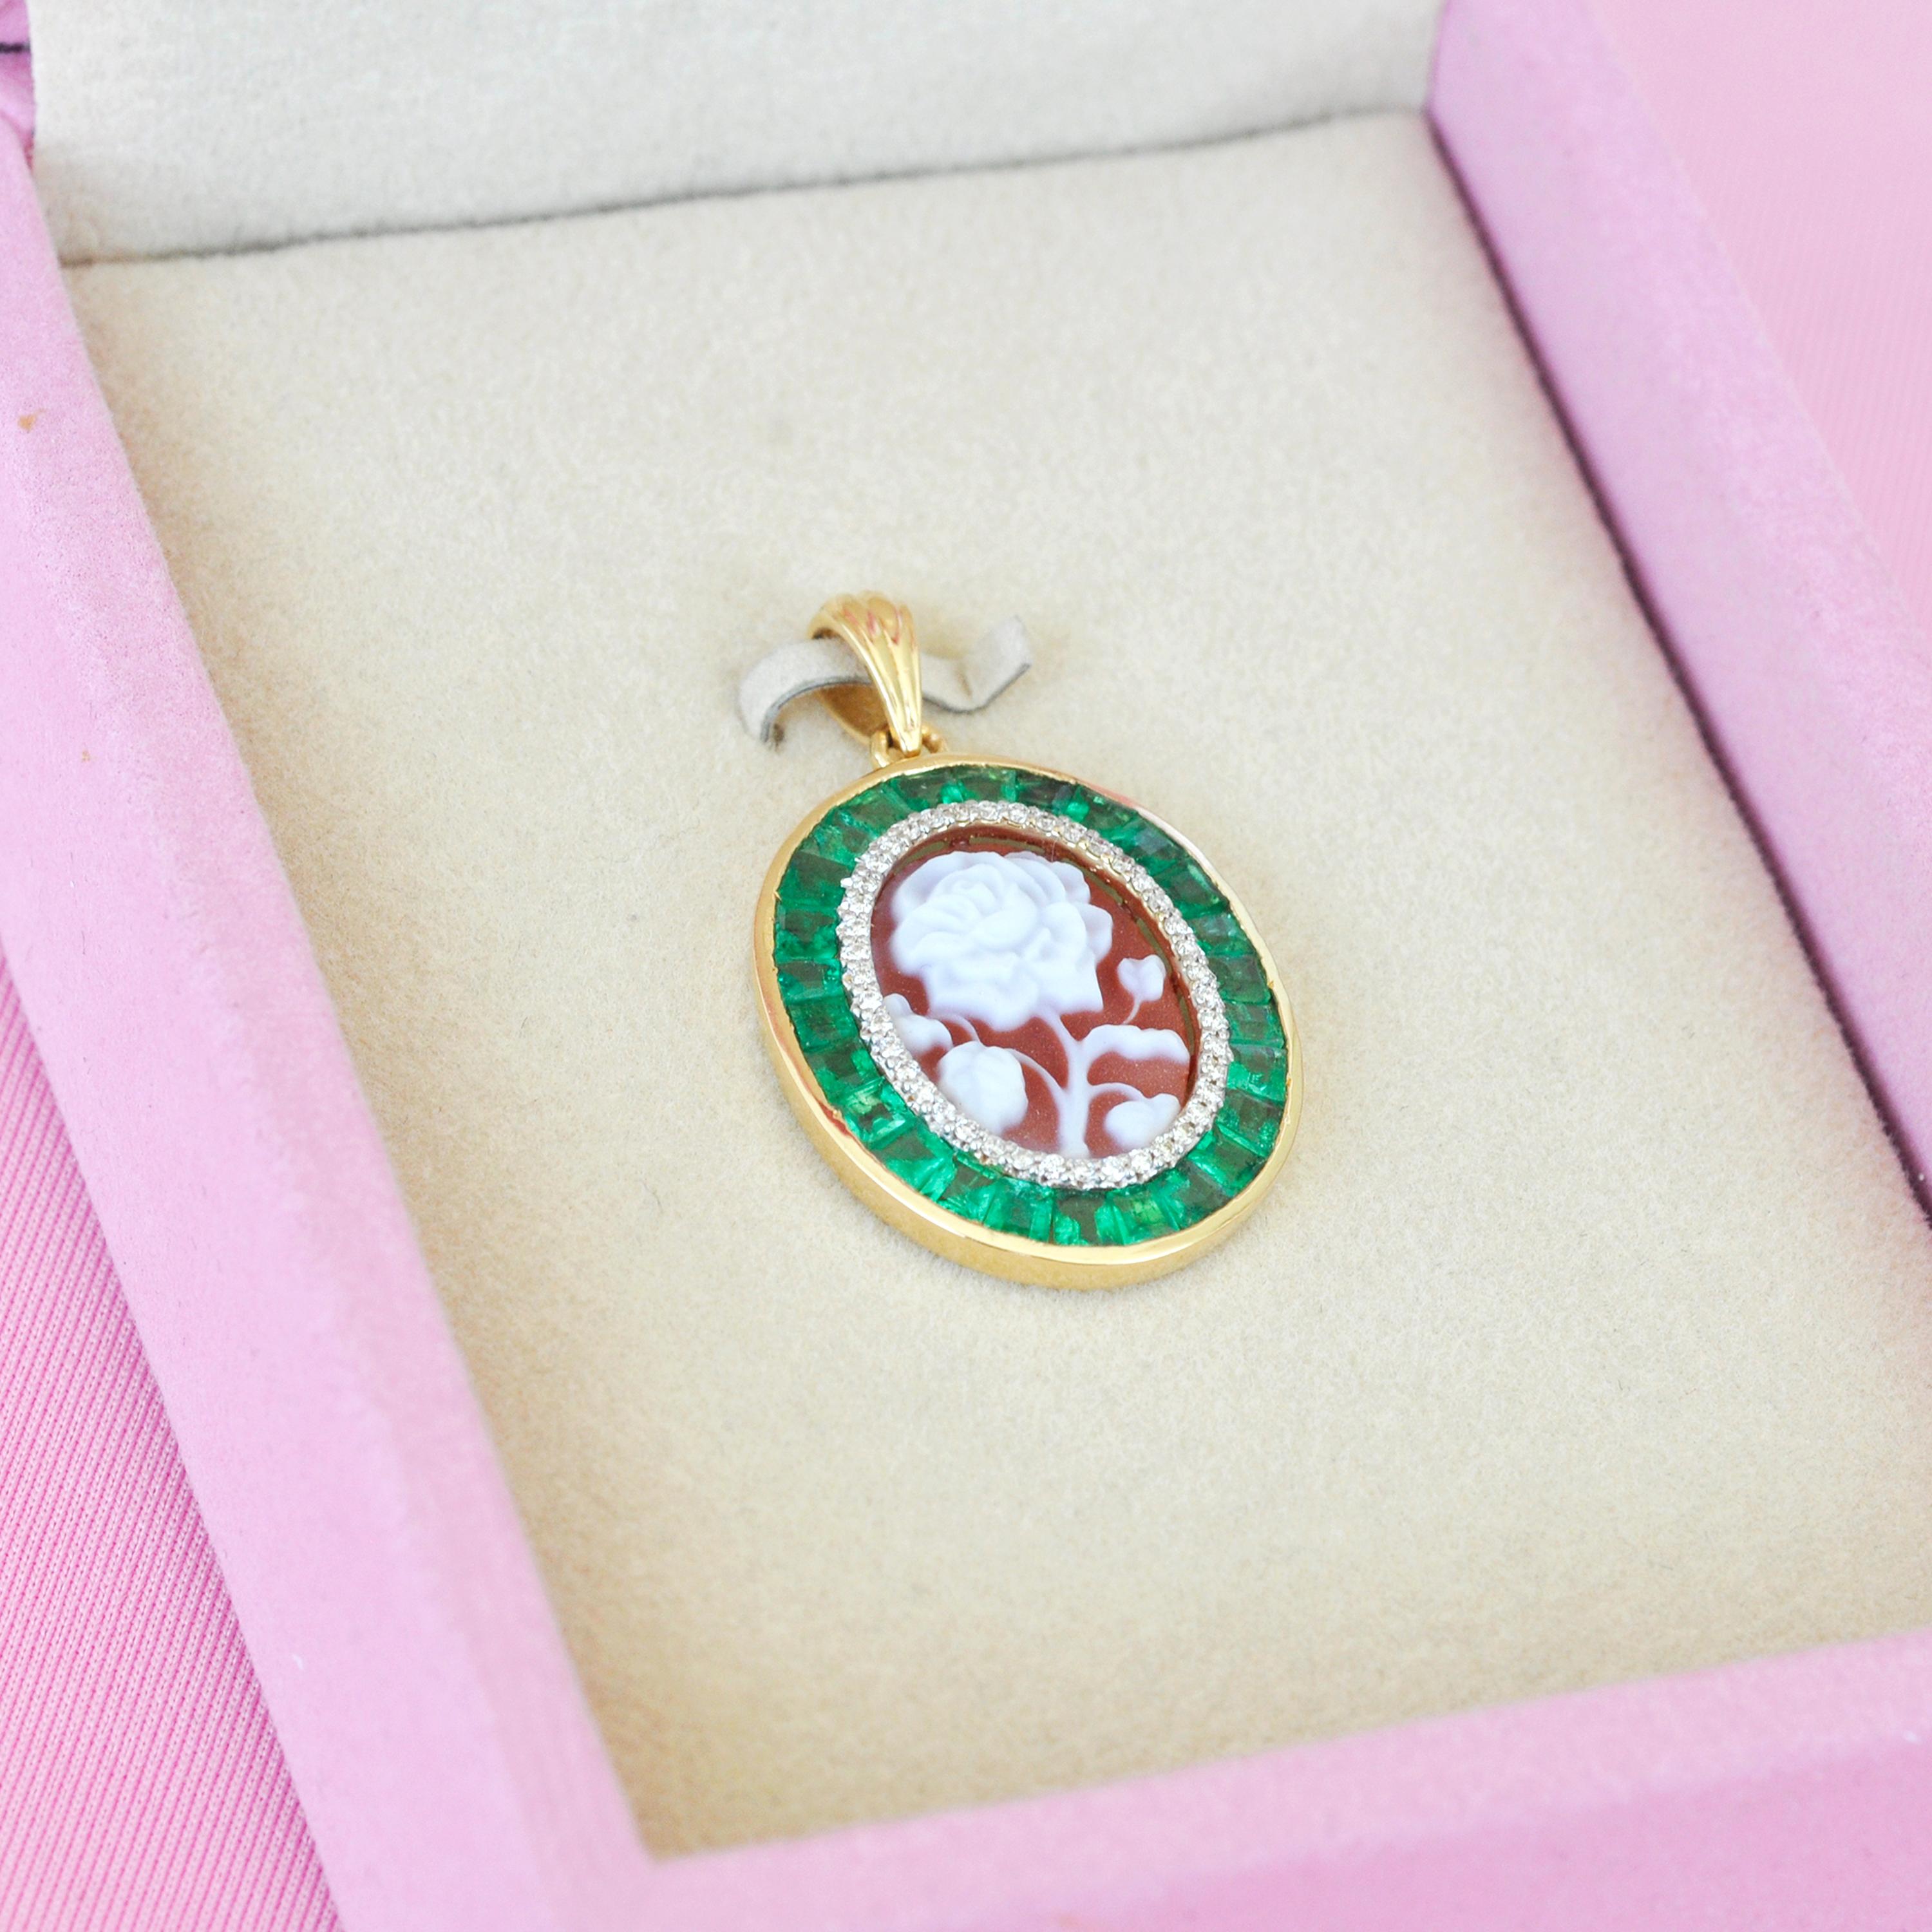 18 Karat Gold Emerald Agate Valentine Rose Cameo Diamond Pendant Necklace In New Condition For Sale In Jaipur, Rajasthan